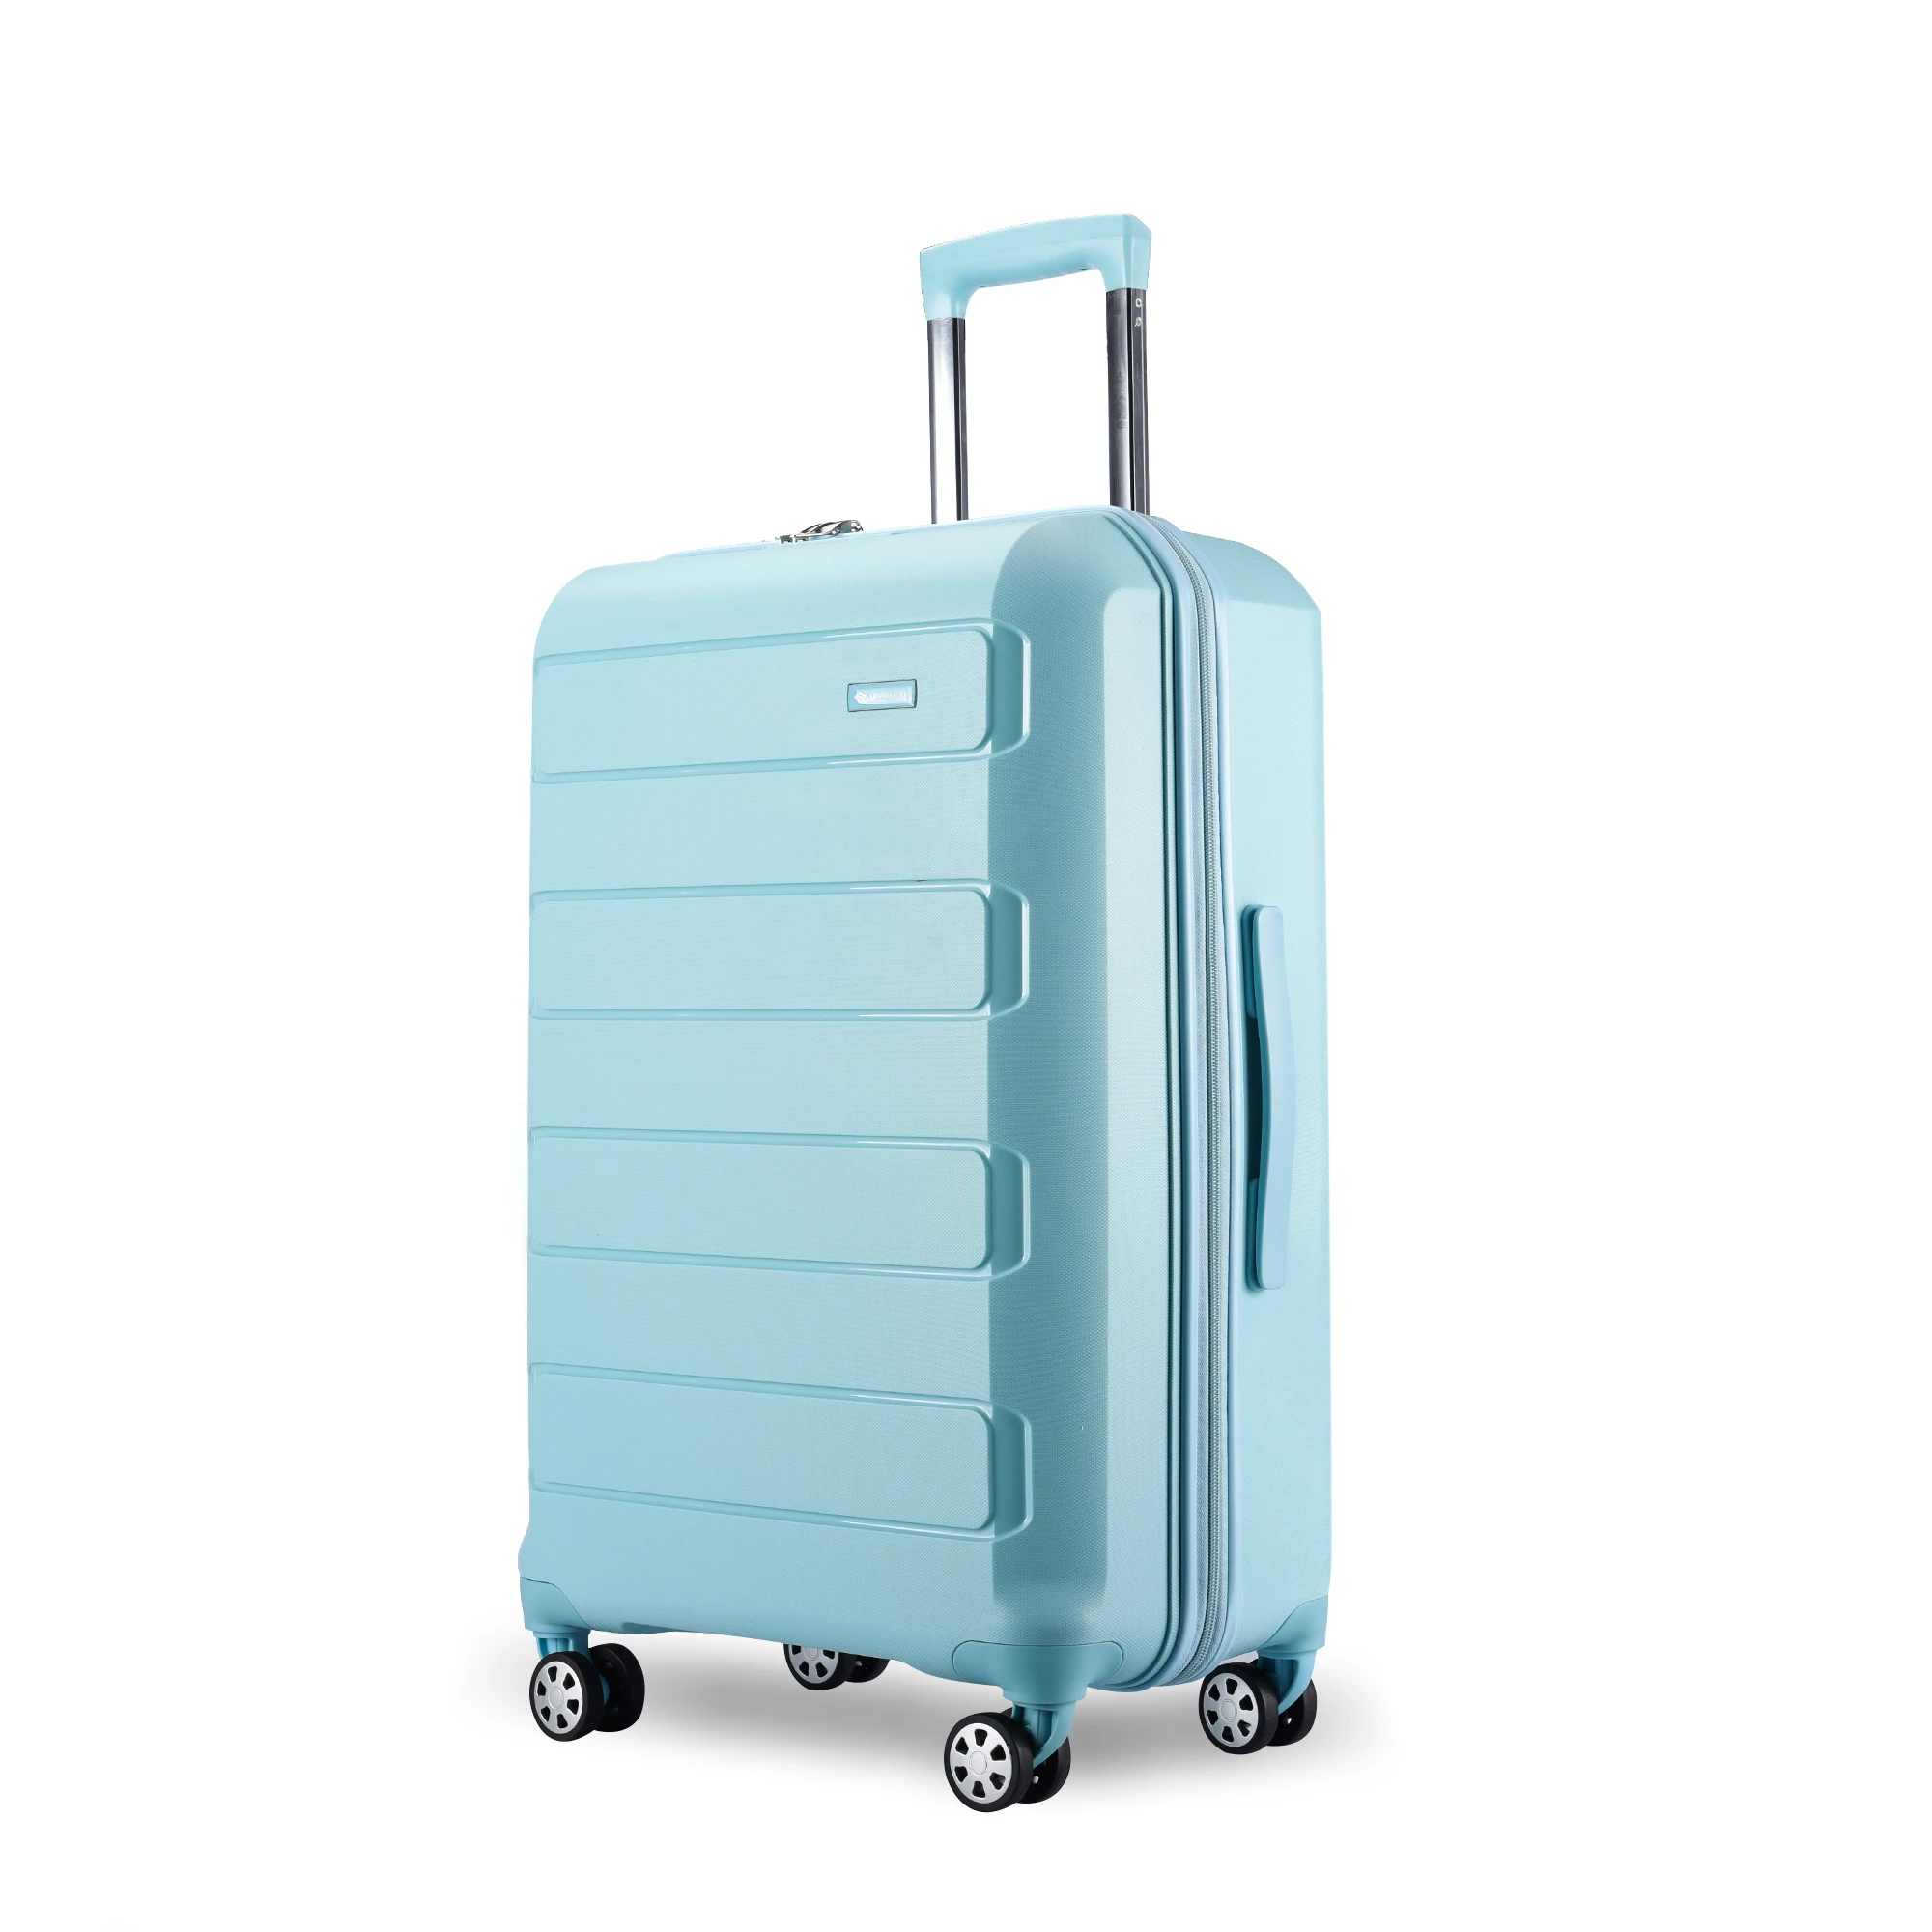 Ad 2019 New Fashion Pp Colorful Luggage Trolley Case/cabin Luggage ...